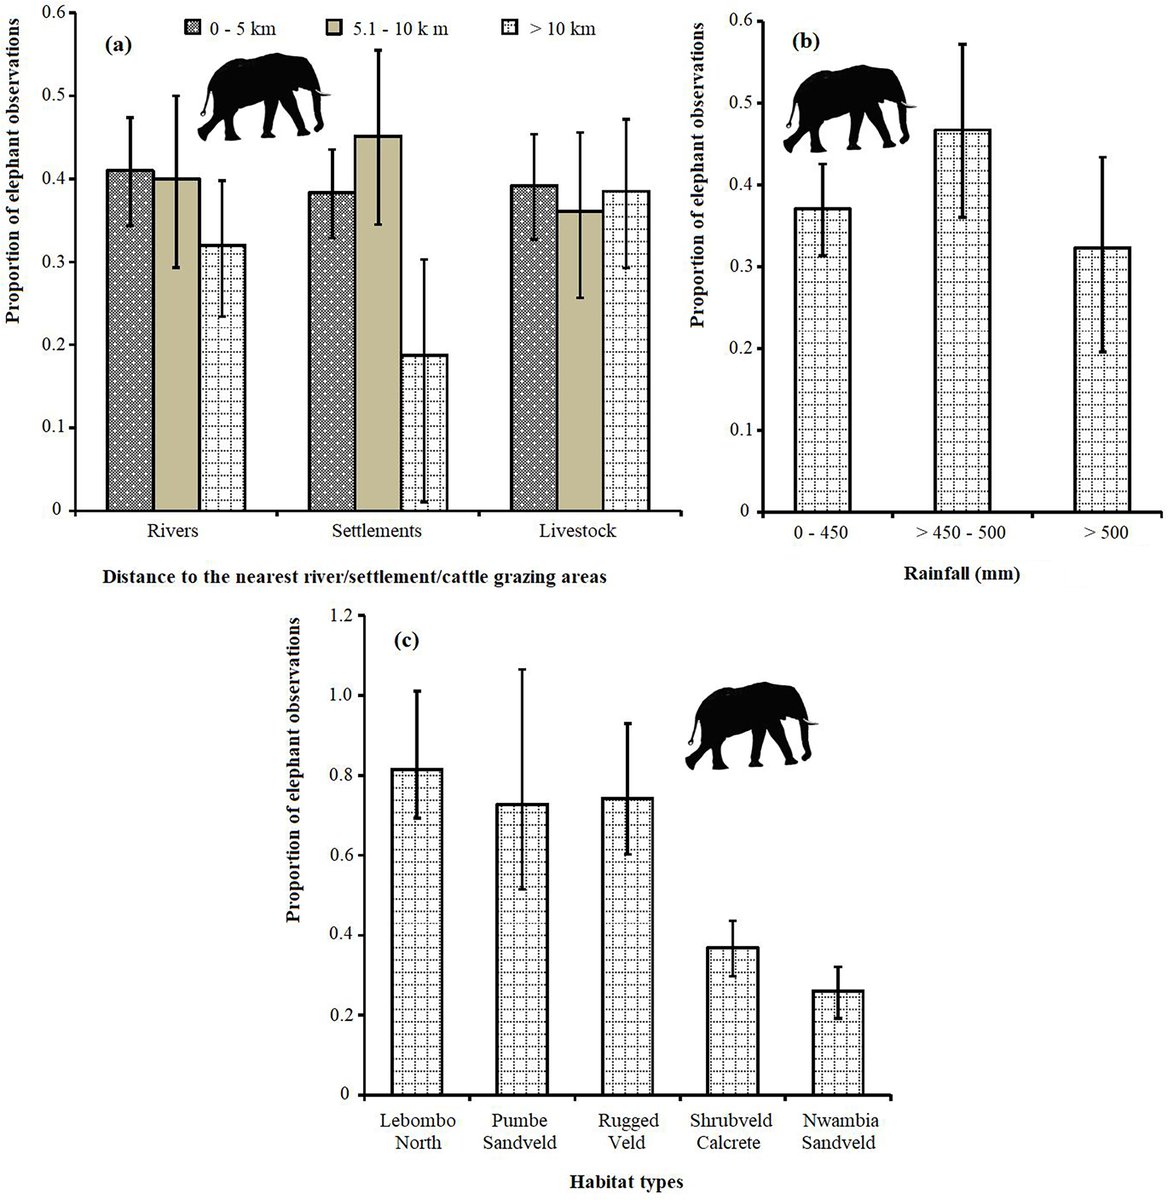 New in @ESAEcosphere: As Limpopo National Park's wildlife recovers from decades of war and poaching, which habitats will large herbivores rely on most - and where might #HumanWildlifeConflict arise? doi.org/10.1002/ecs2.4… #AfricanSavanna #HabitatSelection #WildlifeMonitoring